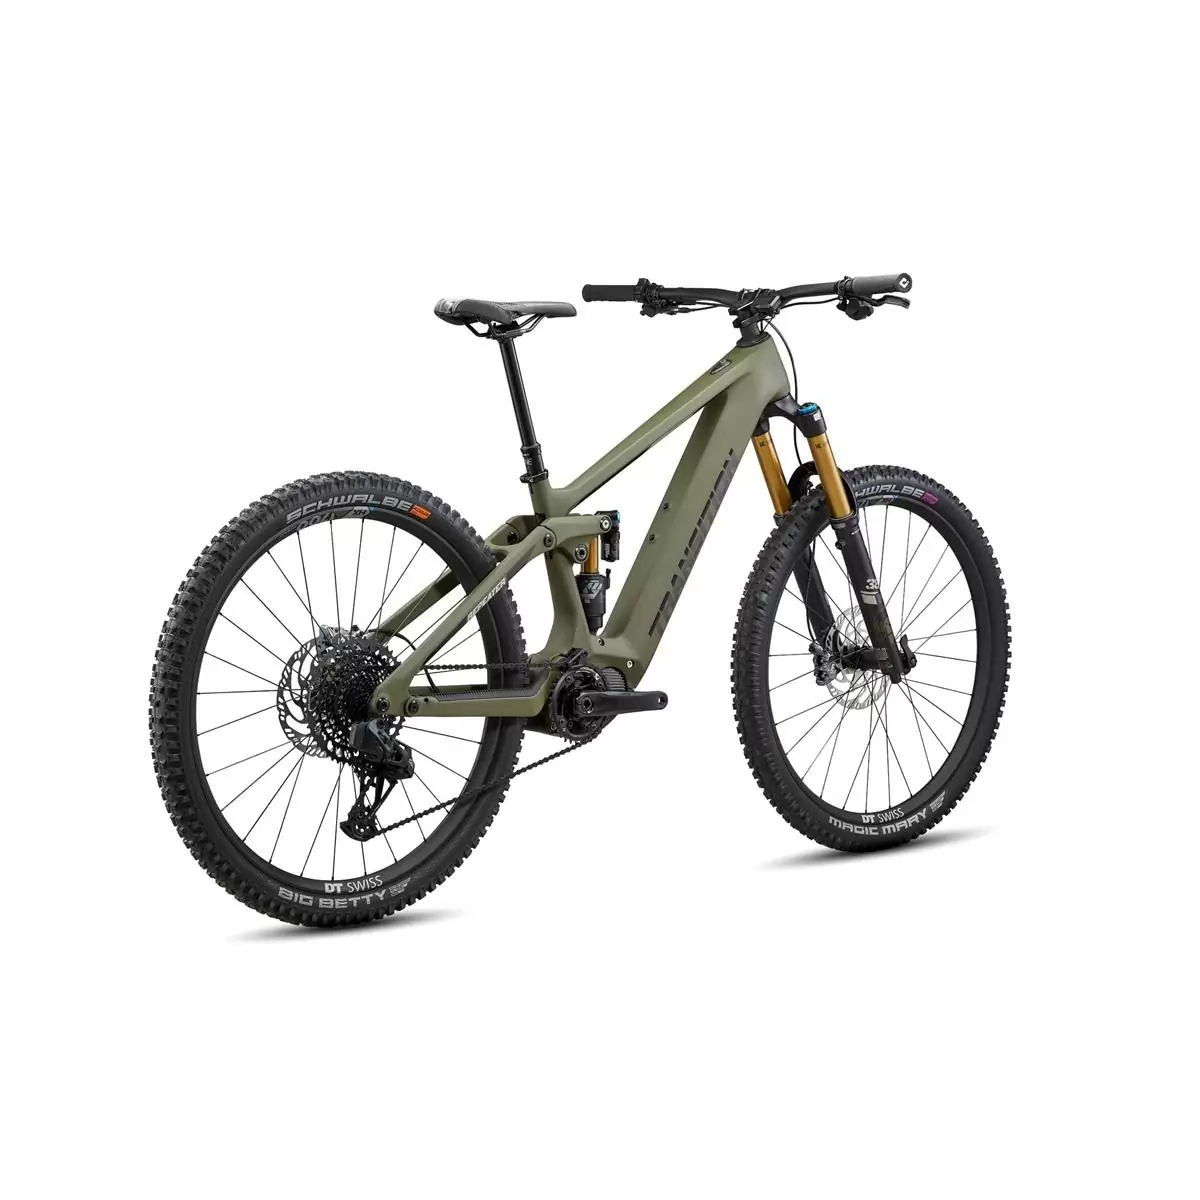 Repetidor Carbono AXS 29'' 160mm 12s 630Wh Shimano EP8 Mossy Green Talla L #2